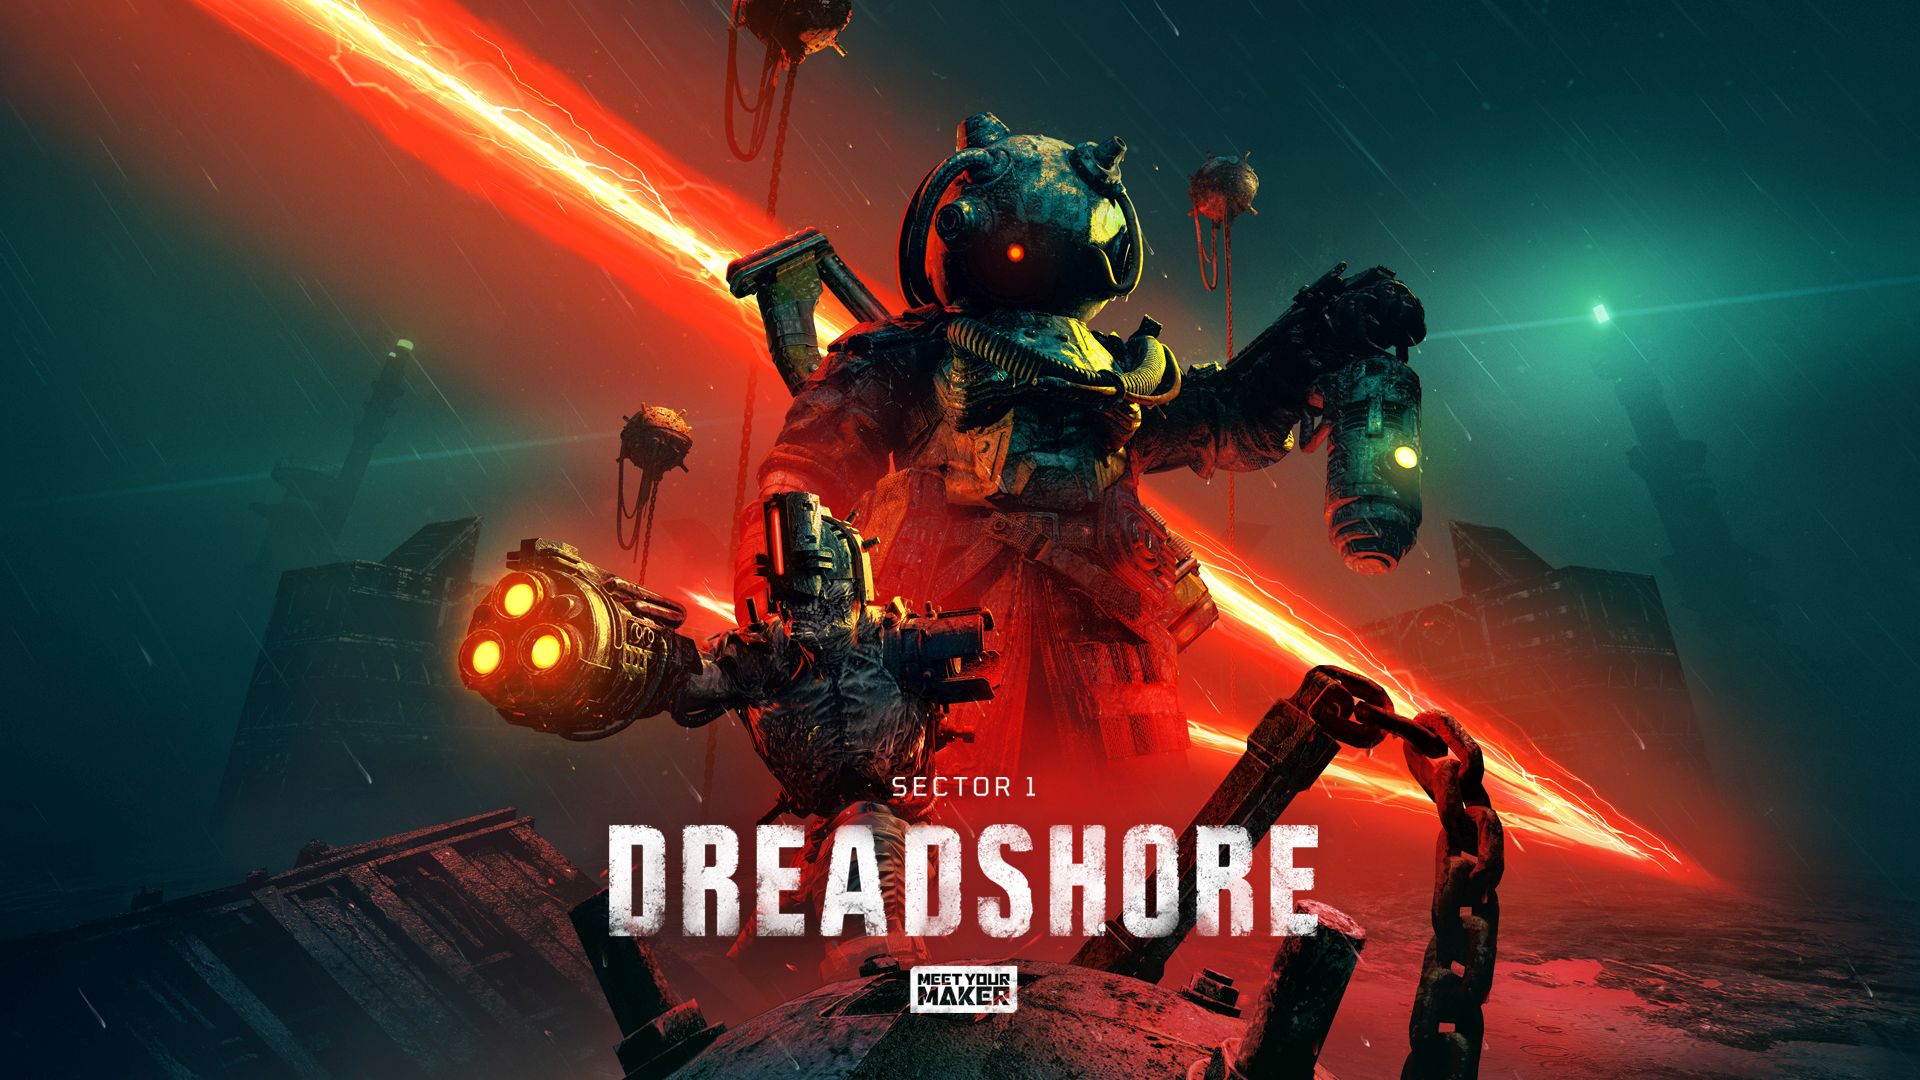 Meet Your Maker Sector 1: Dreadshore Provides New Harmful Instruments to Your Arsenal